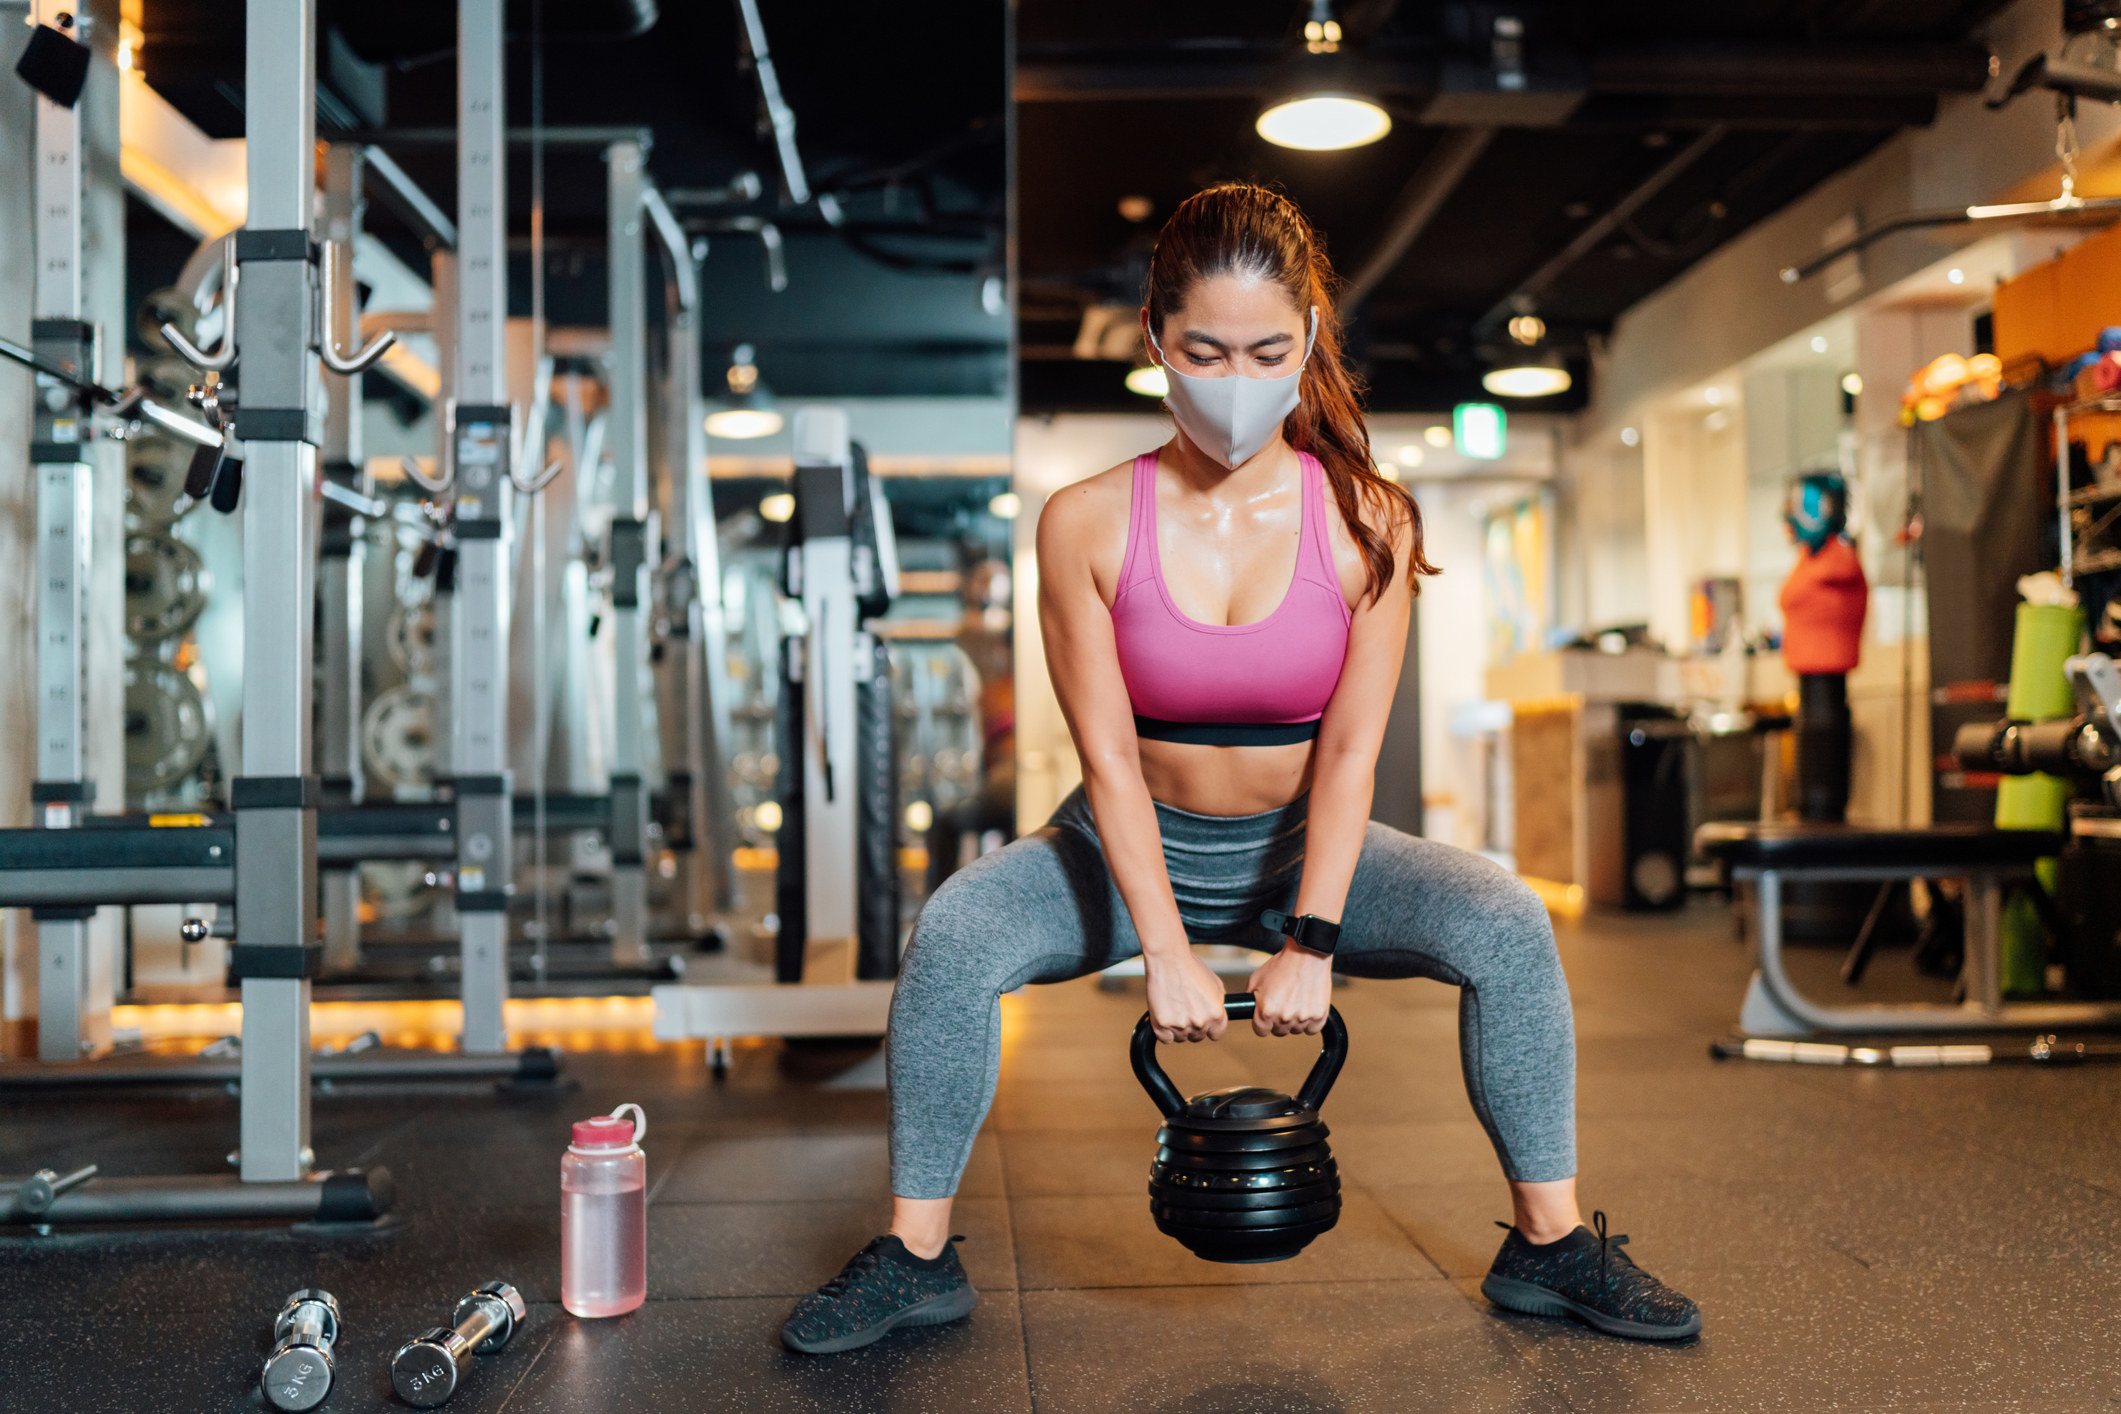 A person lifting a weight at the gym, wearing a mask.